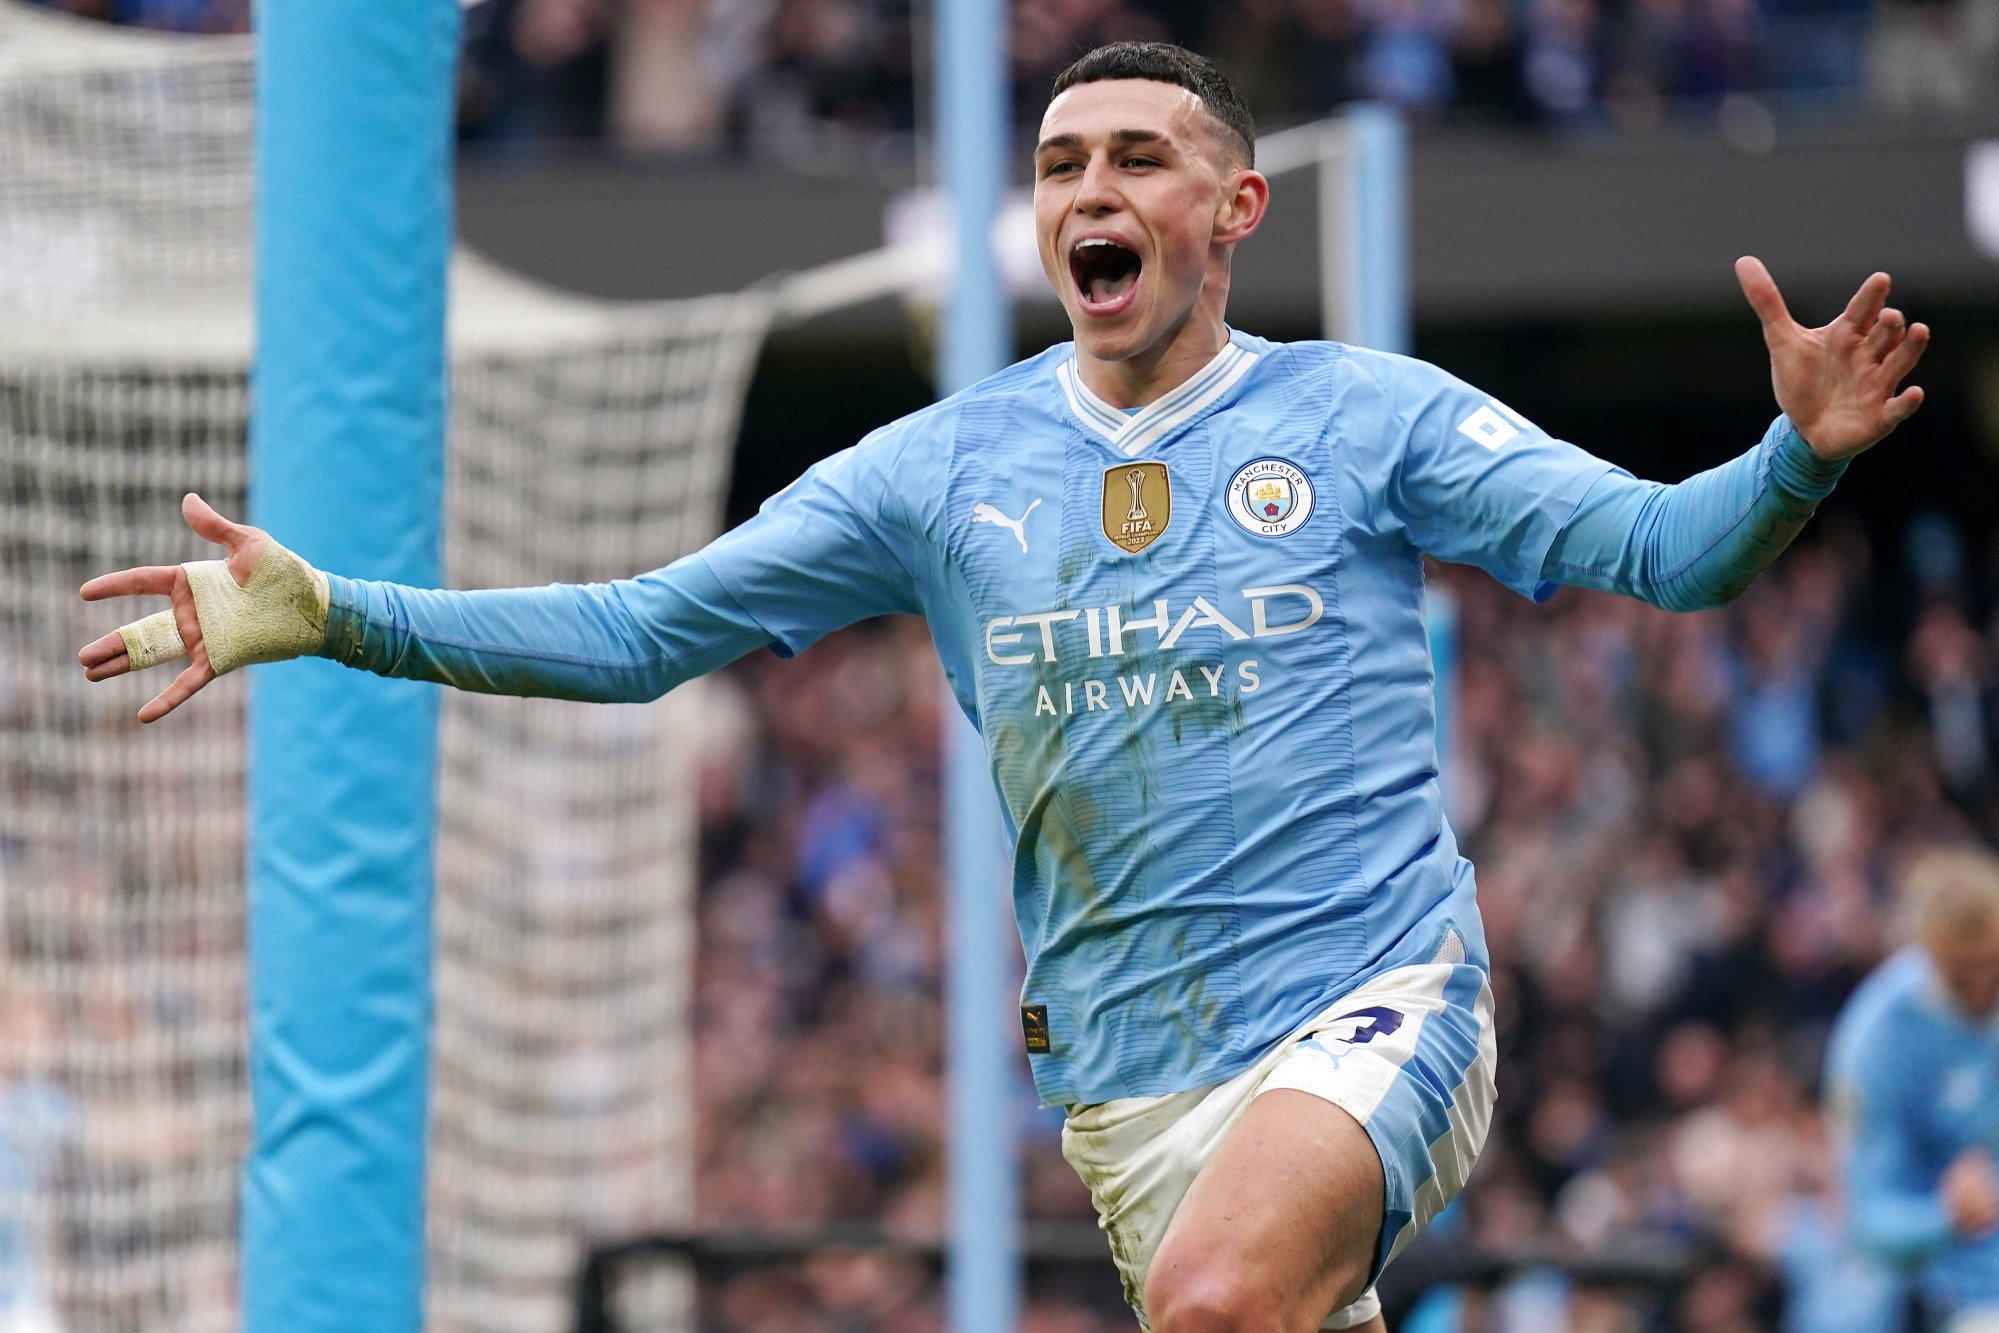 Who is English Premier League's best player? Pep Guardiola says it's  Manchester City's Phil Foden | South China Morning Post